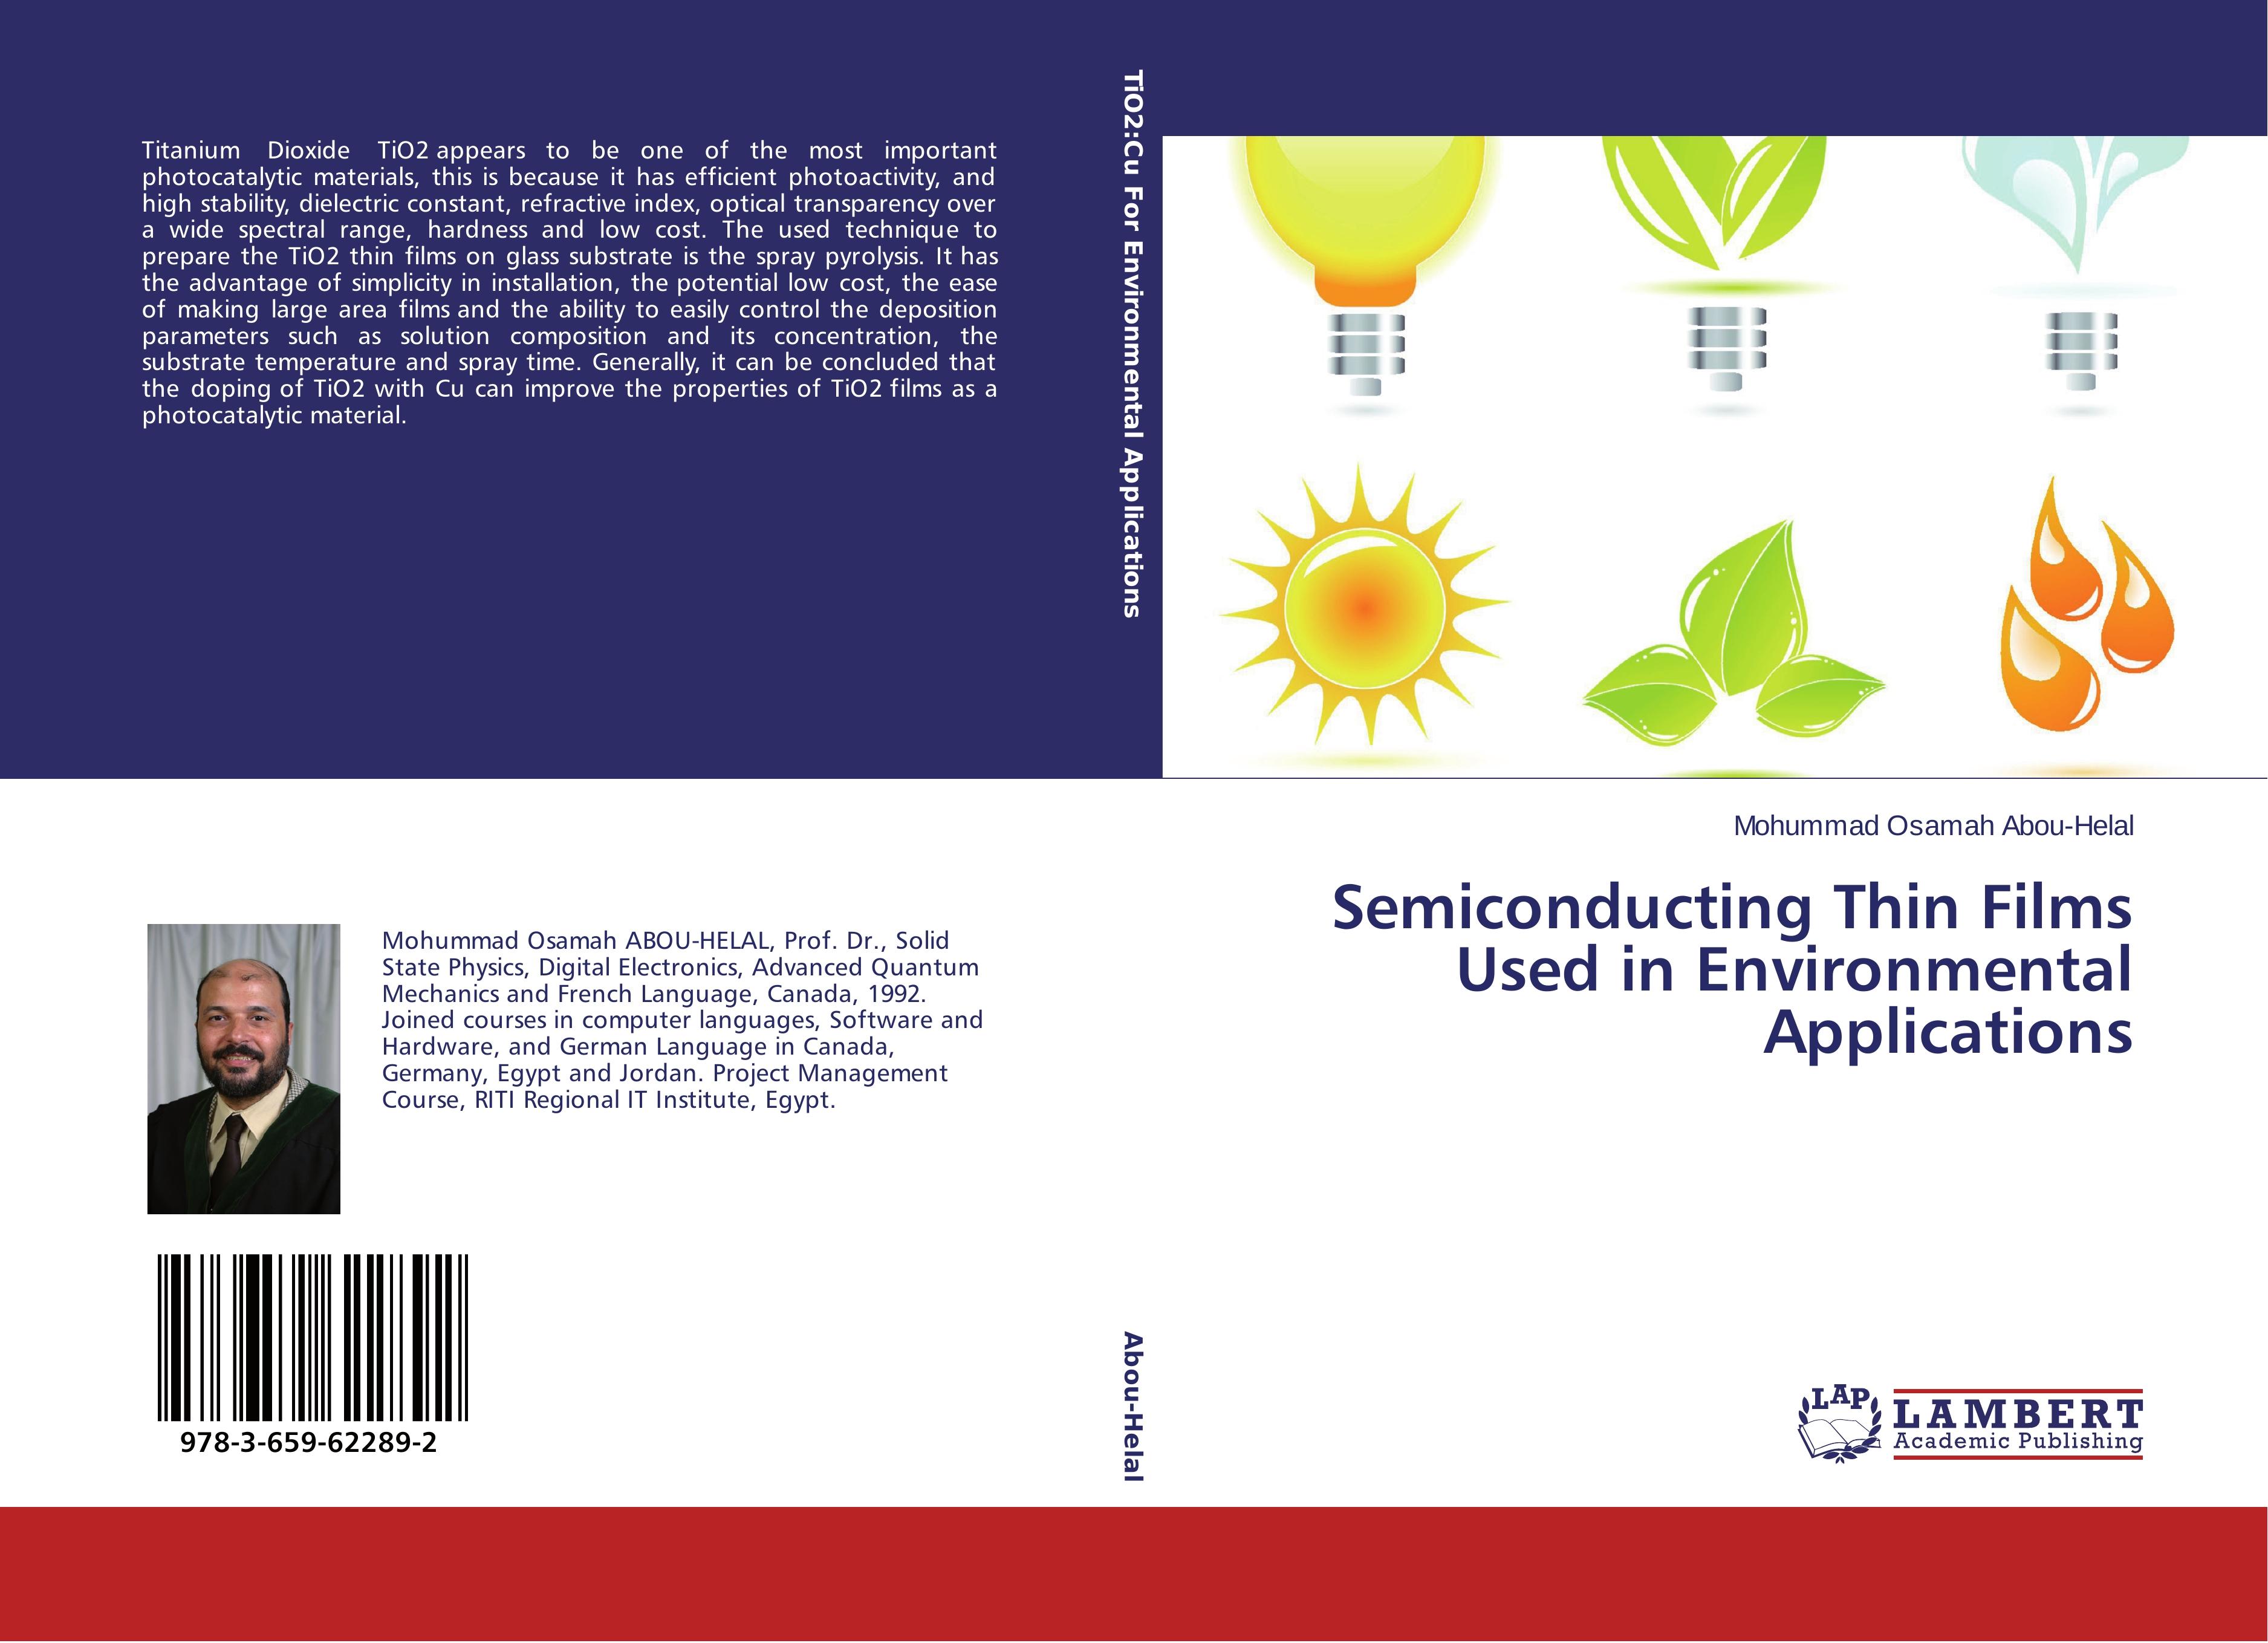 Semiconducting Thin Films Used in Environmental Applications - Mohummad Osamah Abou-Helal